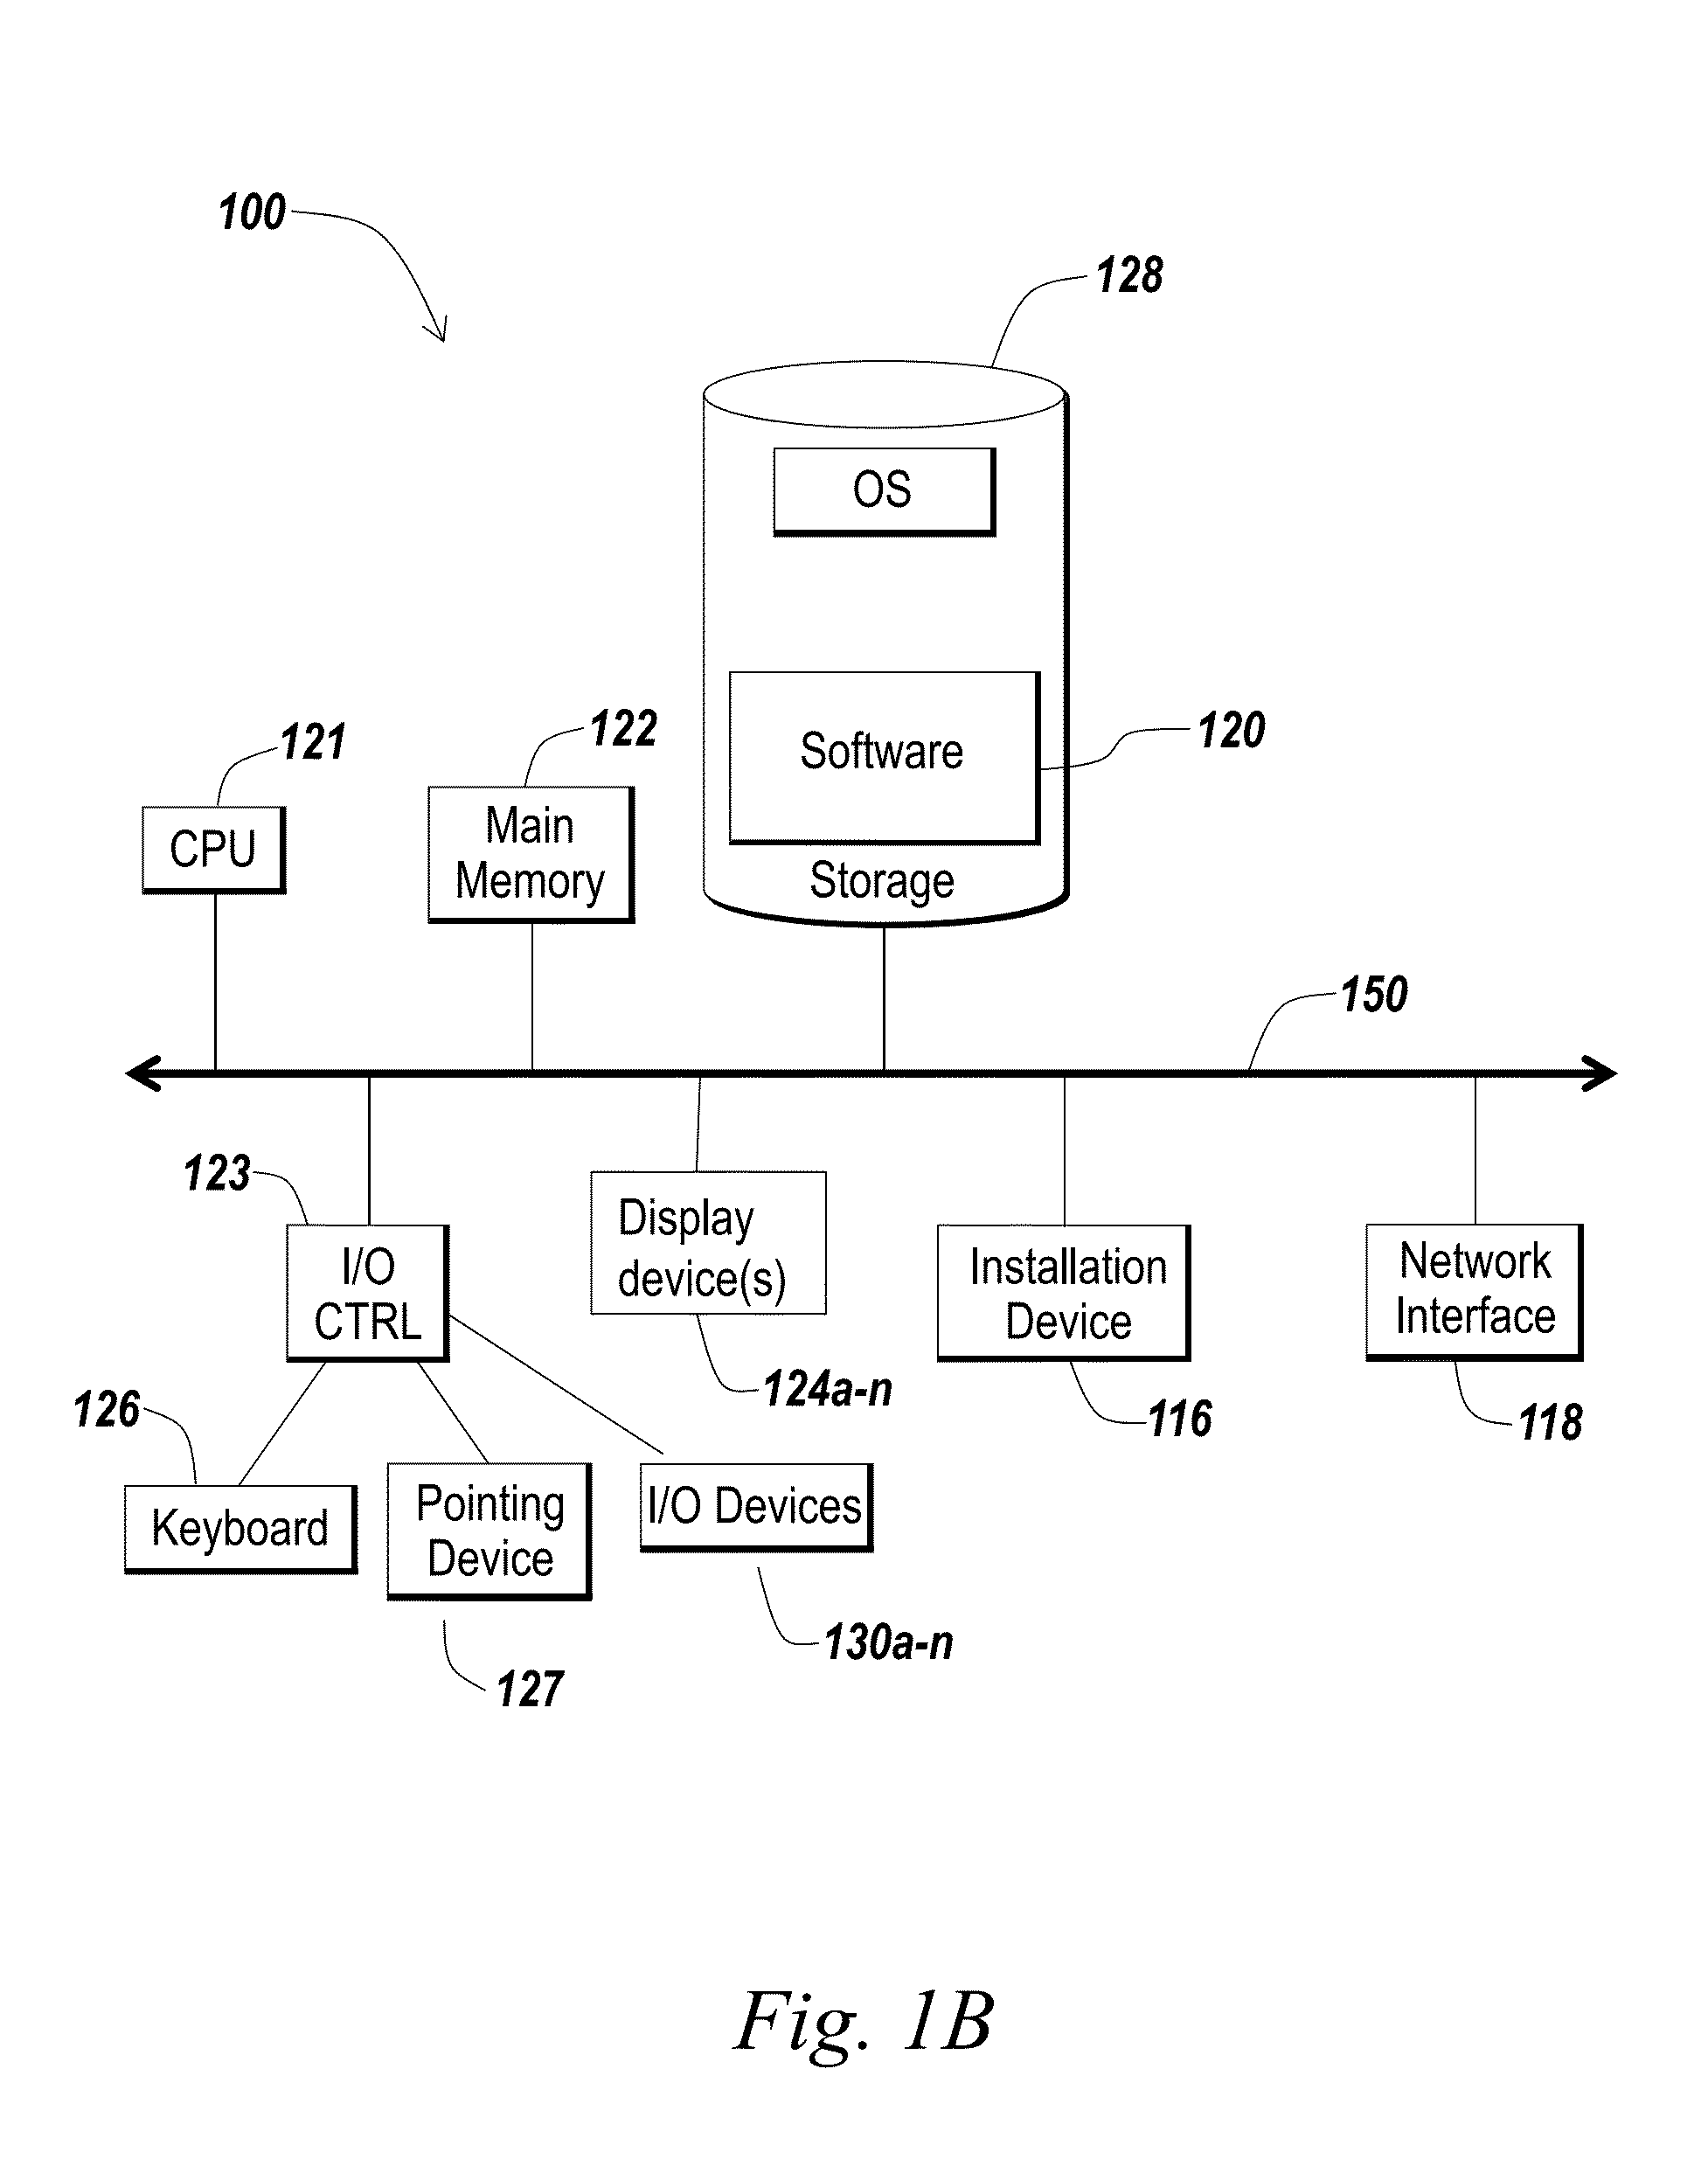 Systems and methods for configuration-based optimization by an intermediary